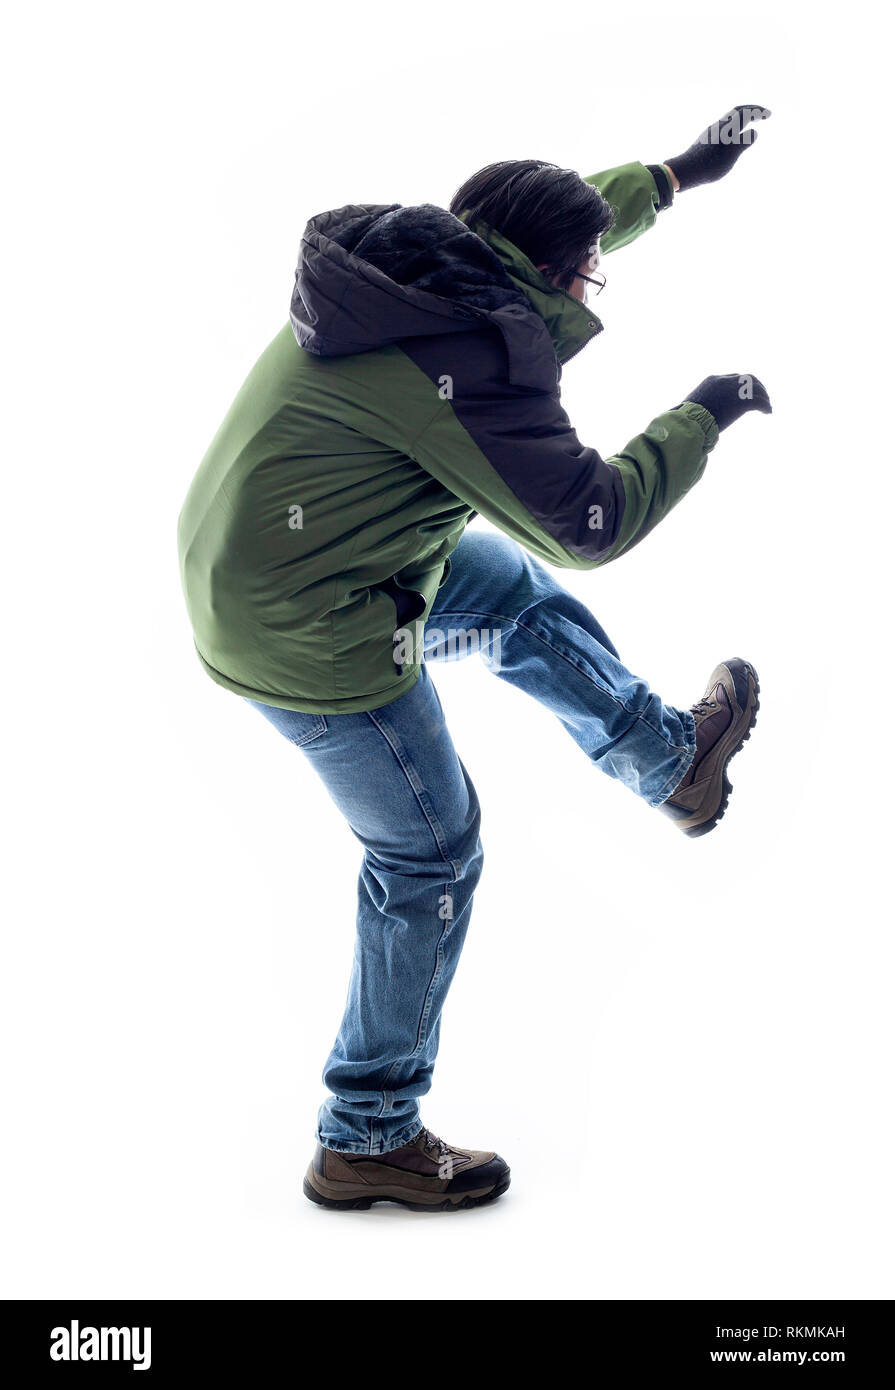 Mountain climber or hiker isolated on a white background for composites.  The man is acting like he is climbing something and depicts adventure and ex Stock Photo